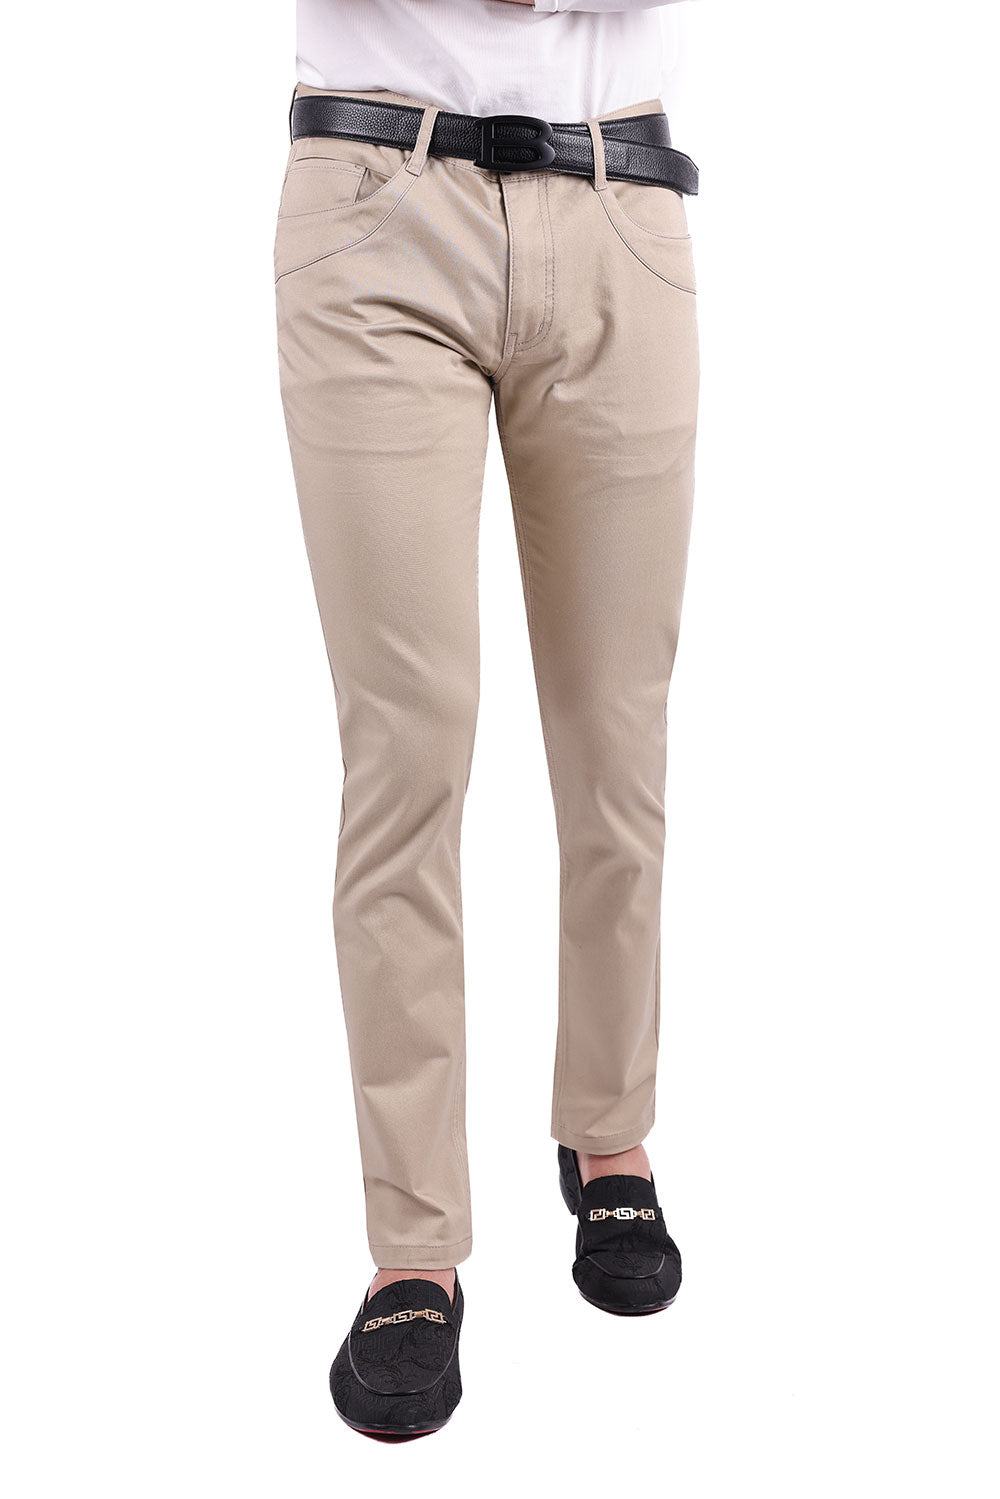 Barabas Men's Solid Color Basic Essential Chino Casual Pants Tan